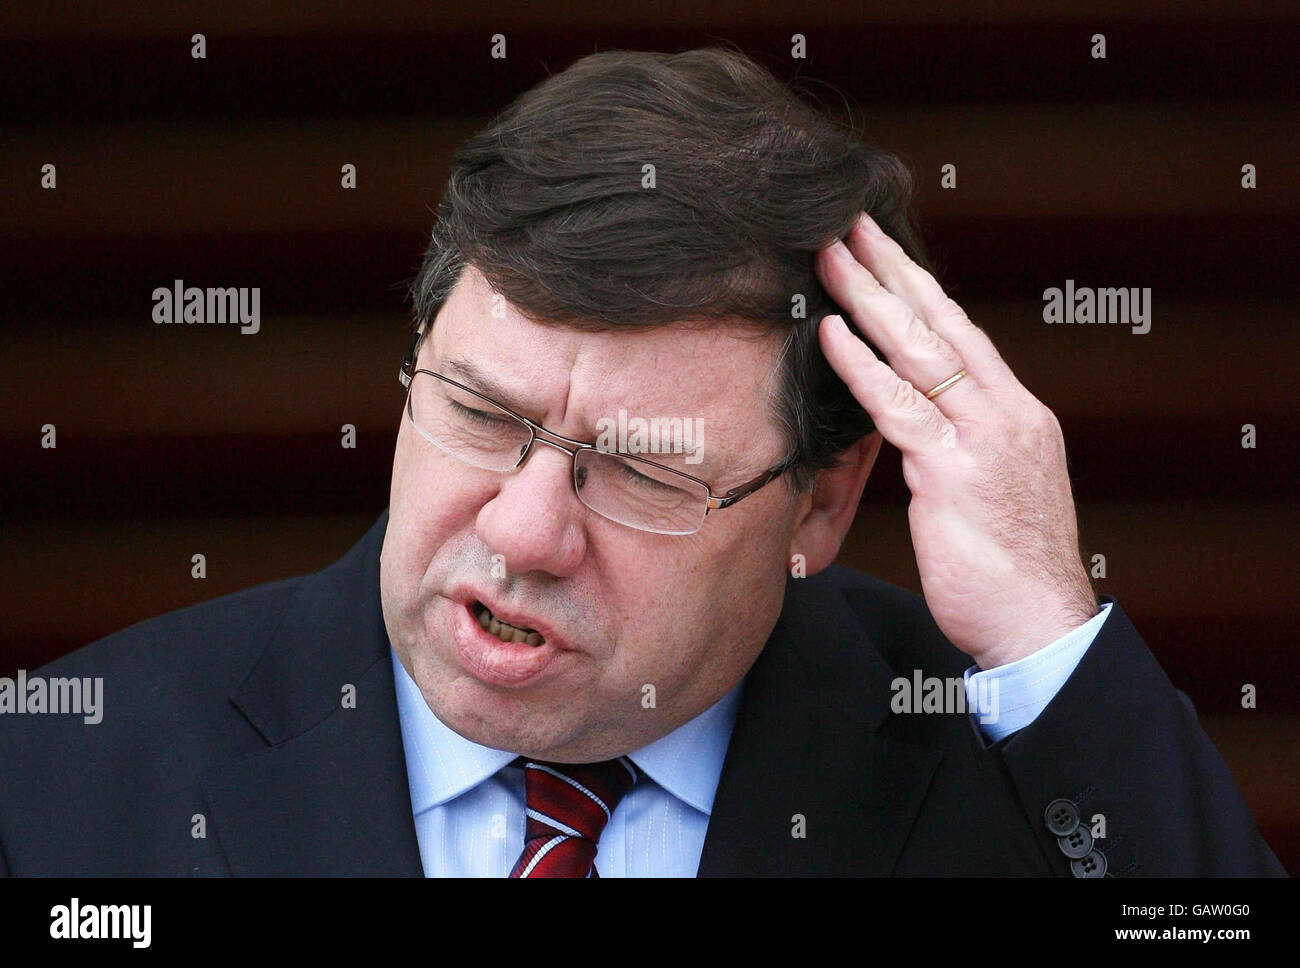 Irish Taoiseach Brian Cowen who has tonight insisted serious efforts were needed to find a solution to the turmoil created by Ireland's rejection of Lisbon. 'We are in uncertain waters. There is no quick fix here,' Mr Cowen said. Stock Photo